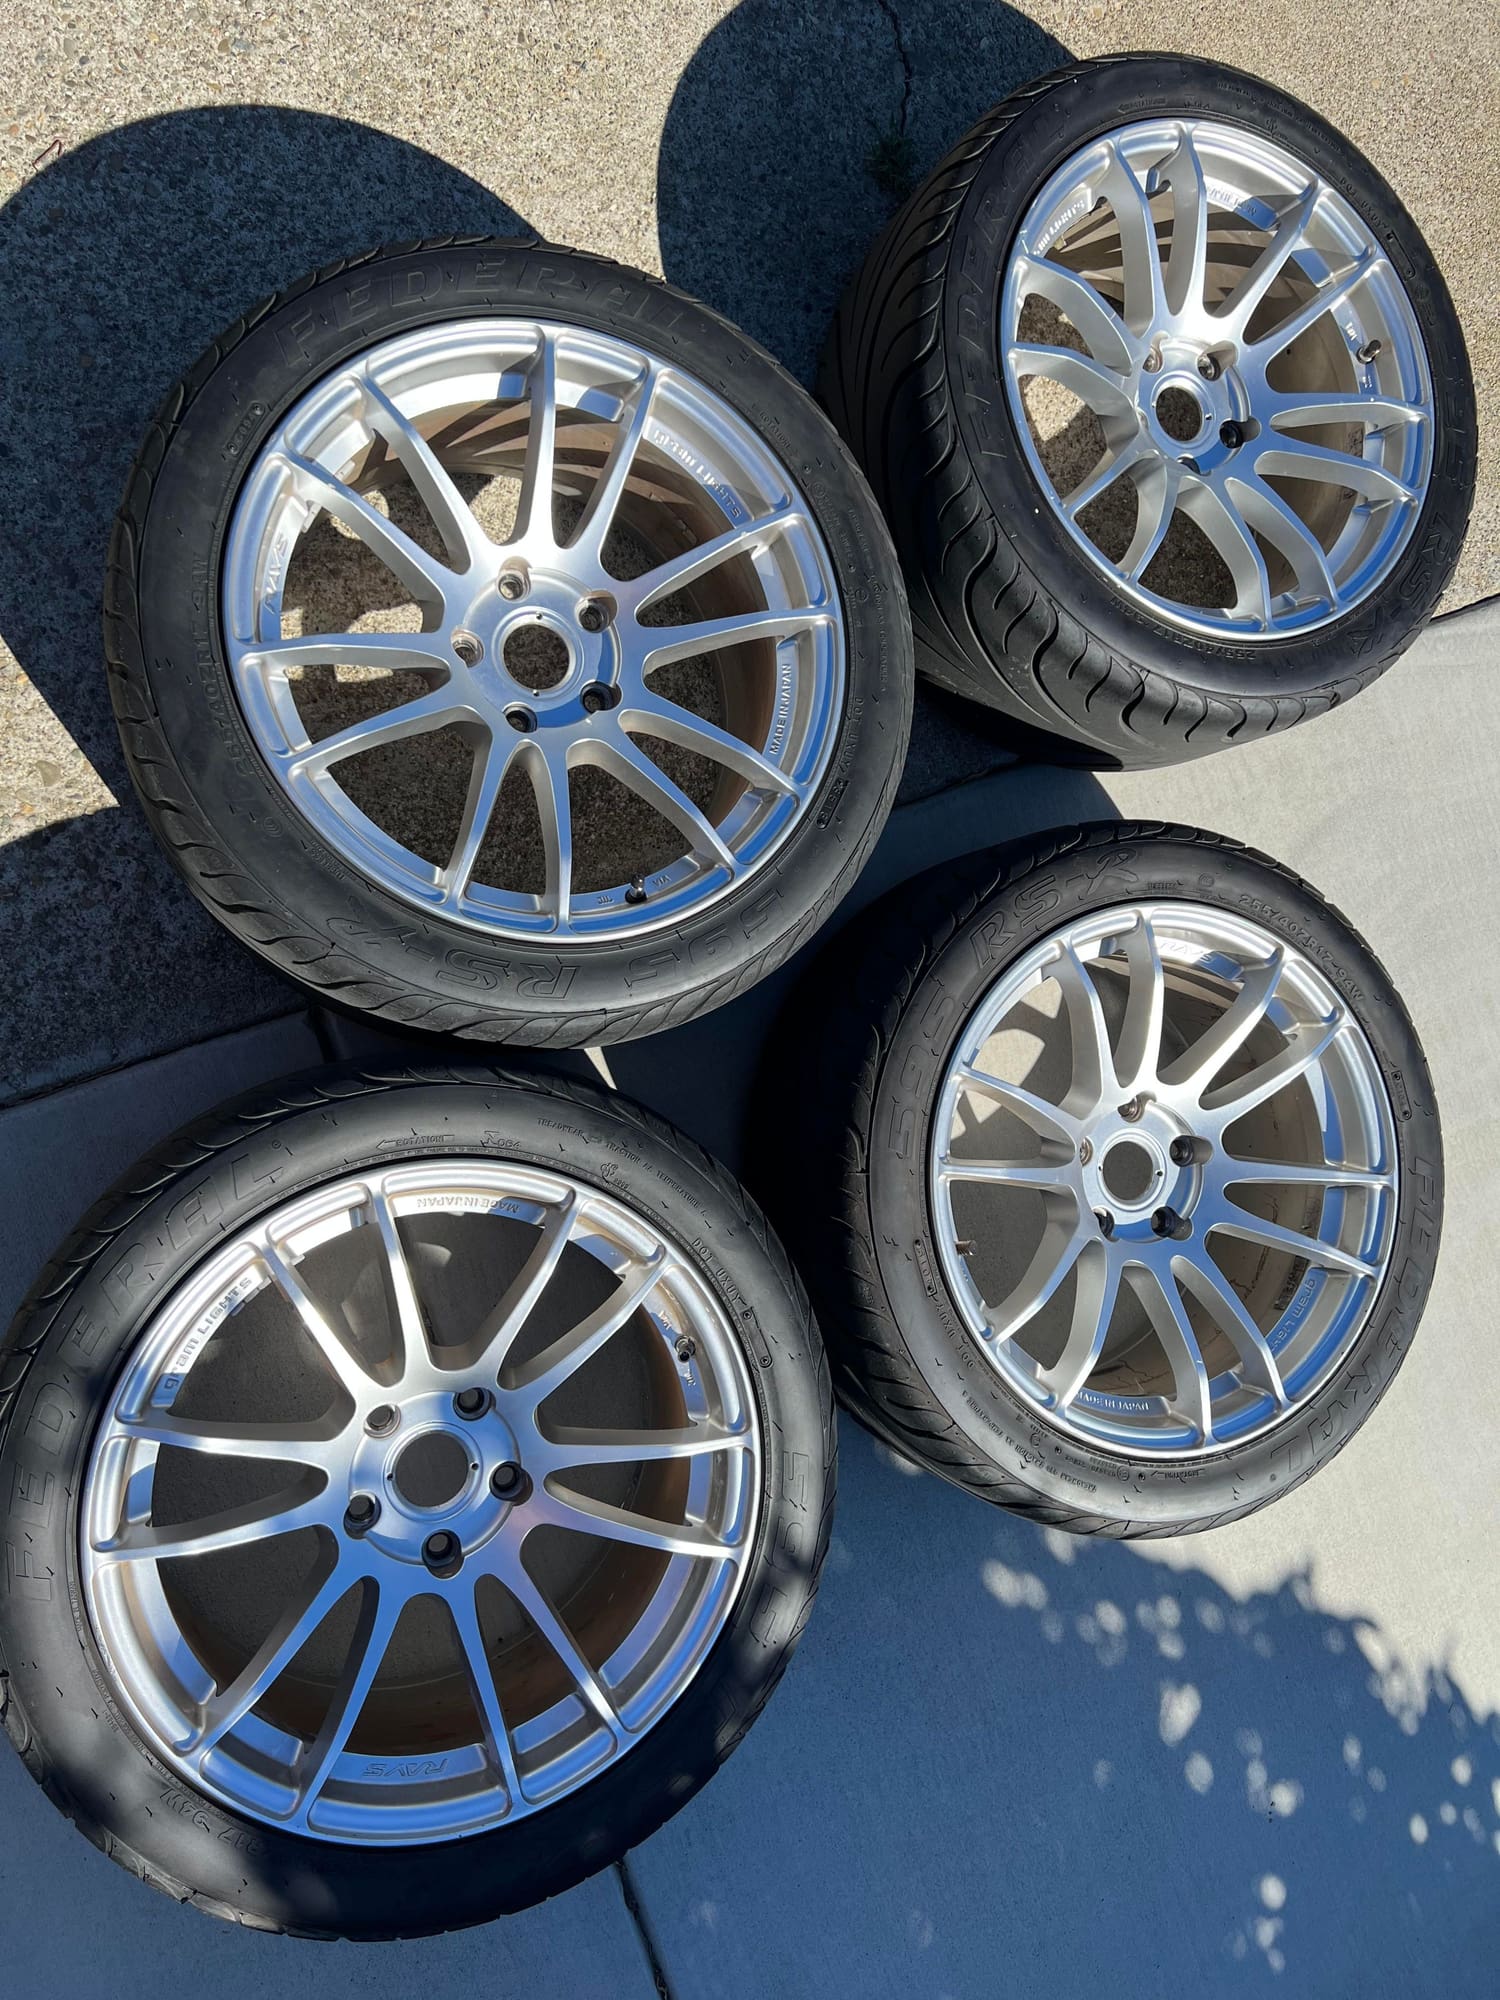 Wheels and Tires/Axles - Gram Lights 57Xtreme 17x9 +40 with 255/40-17 Federal RS-Rs - Used - All Years Any Make All Models - Millbrae, CA 94030, United States